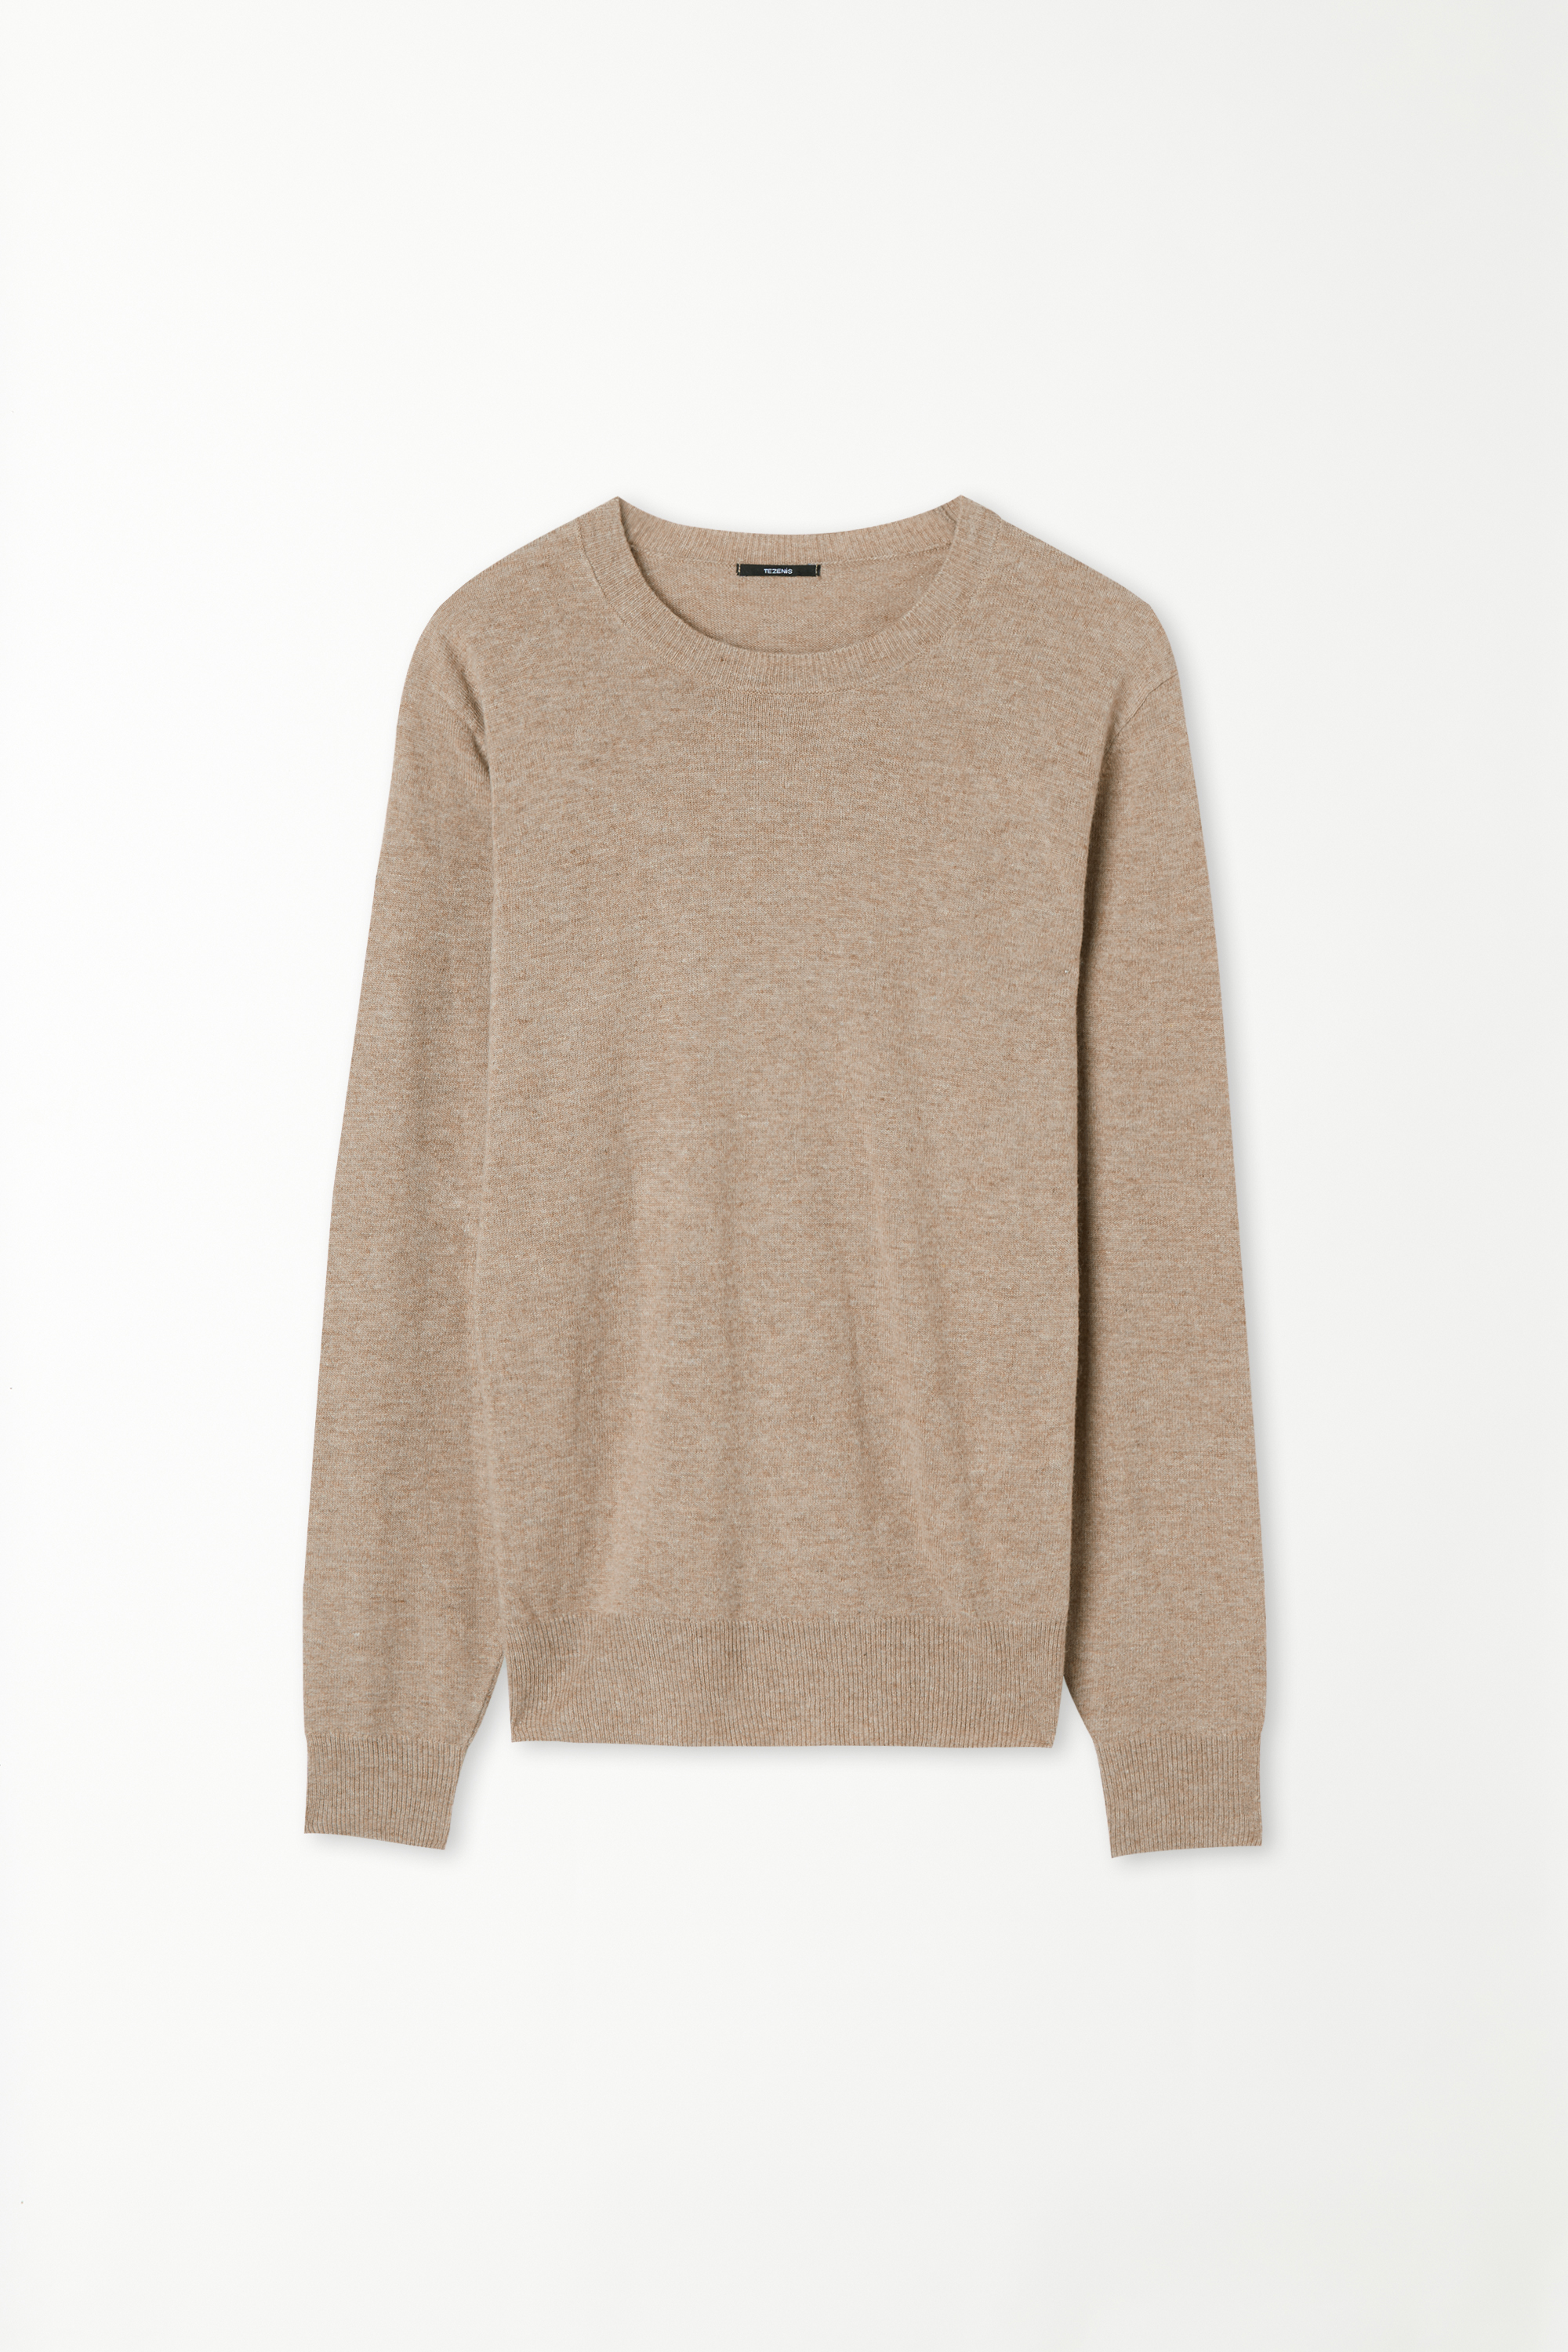 Long-Sleeved Rounded Neck Heavy Jersey with Wool